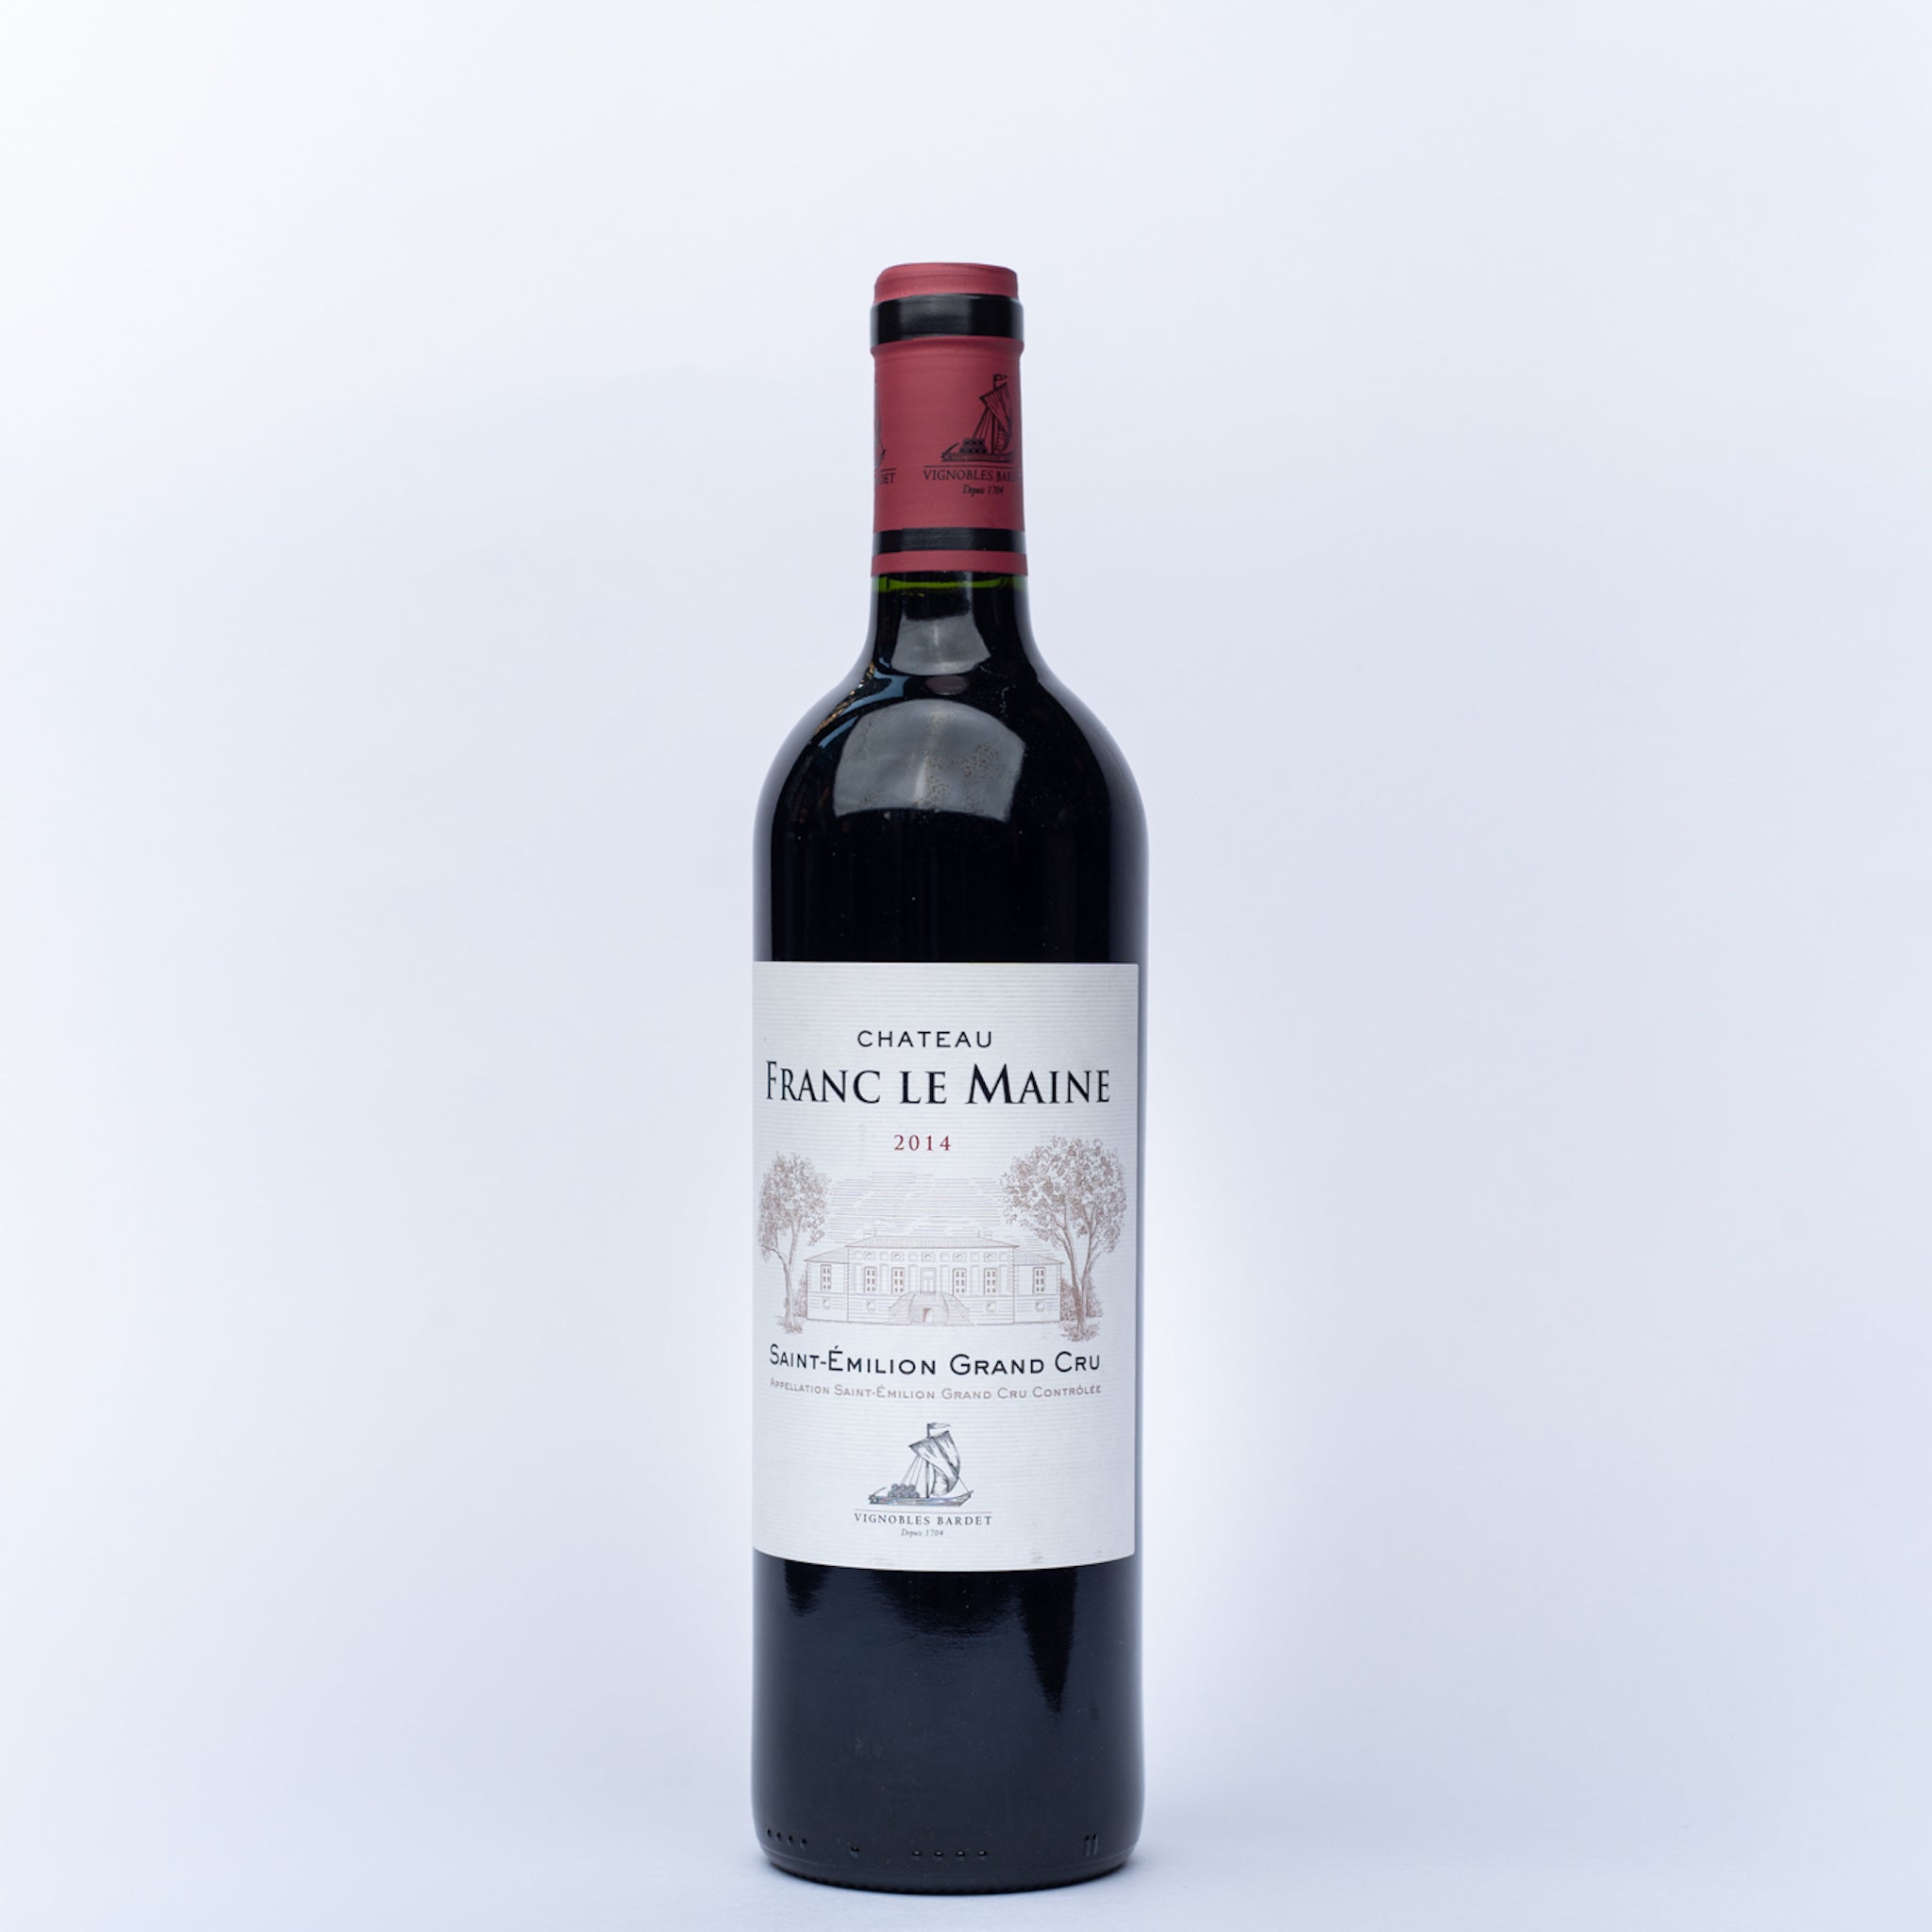 A 750ml bottle of Chateau Franc Le Maine red wine.